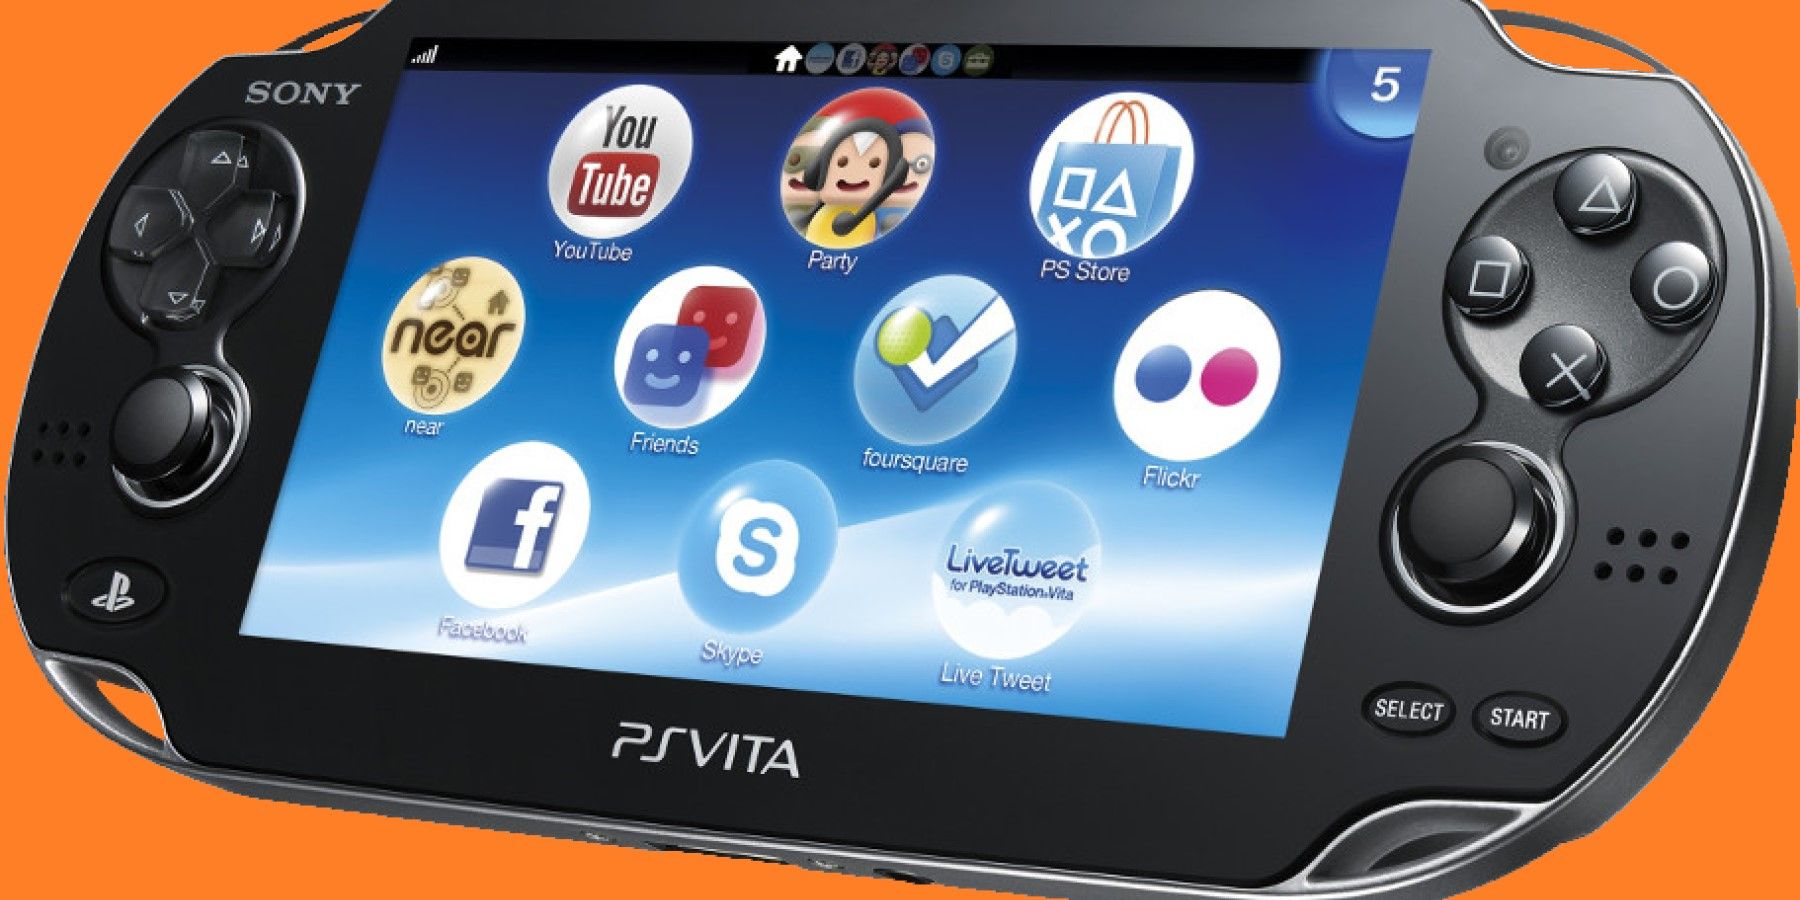 Report: Sony May Be Working On A New PlayStation Handheld After All